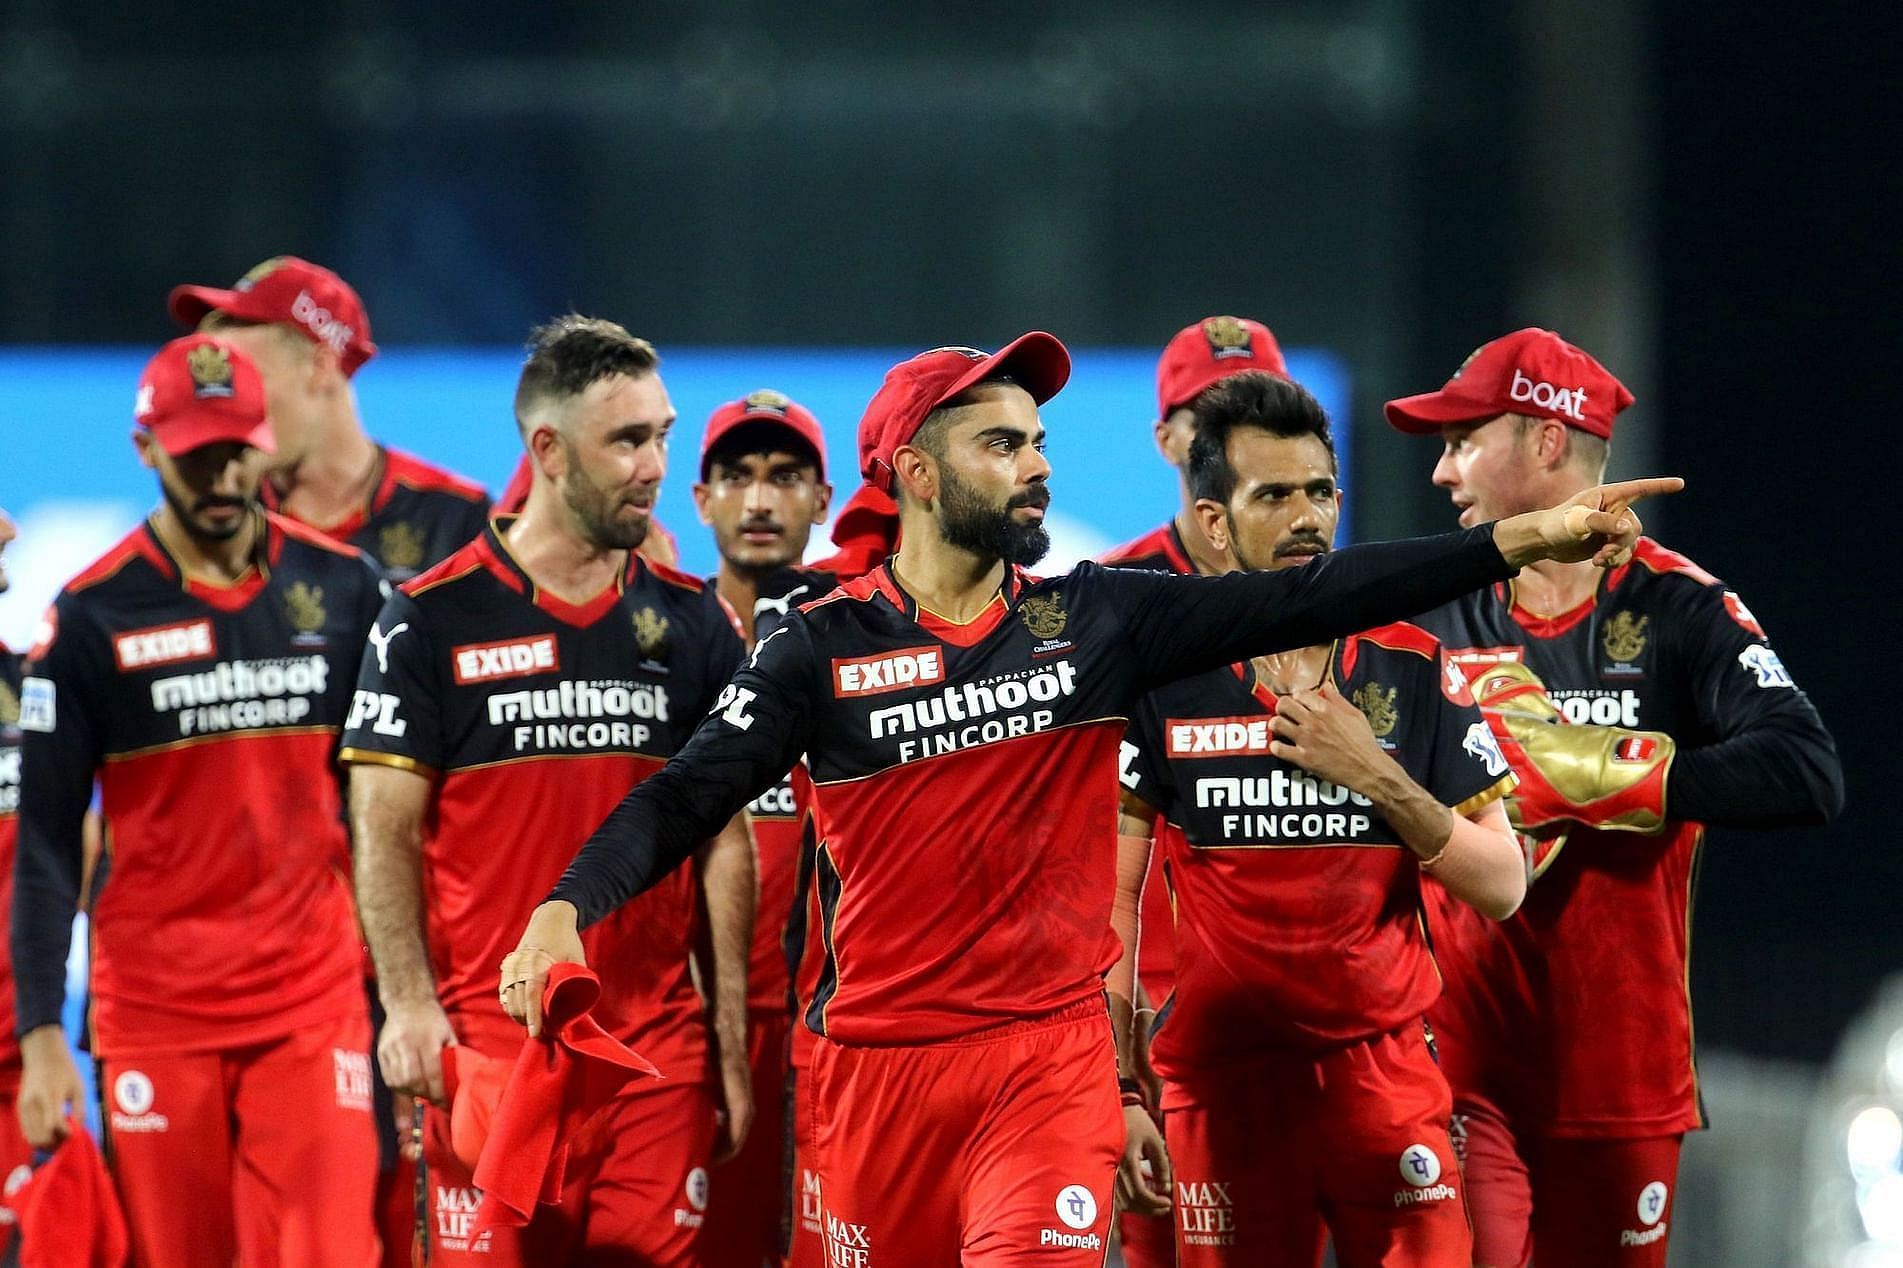 Royal Challengers Bangalore will open their IPL 2022 campaign against Punjab Kings